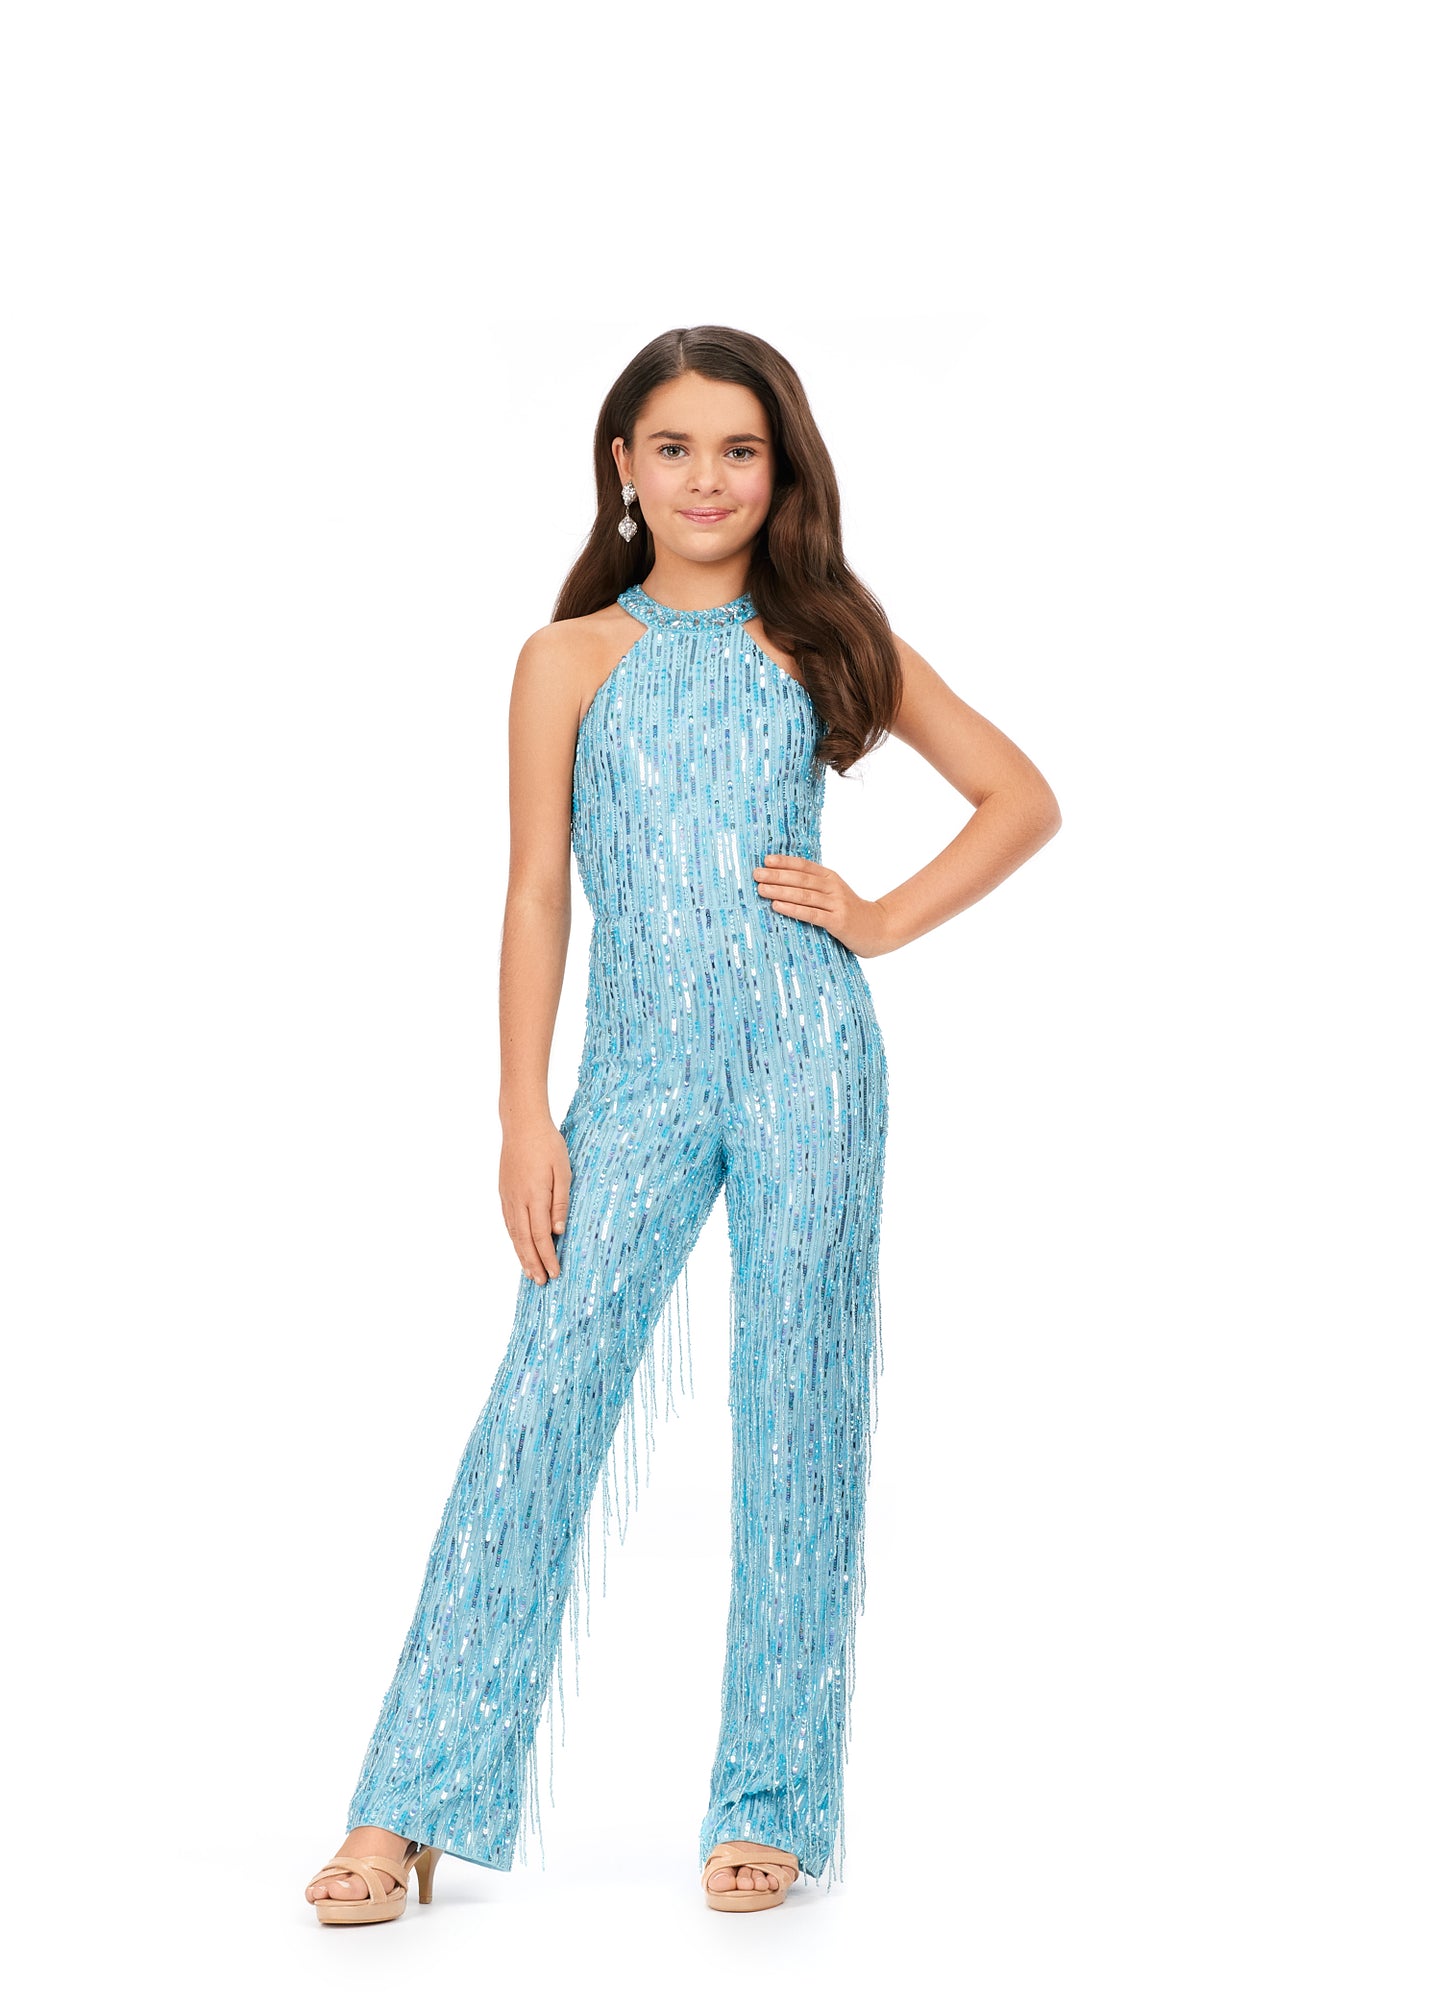 Ashley Lauren Kids 8194 Fully Beaded Halter Top Fringe Jumpsuit. A jumpsuit ready for the runway! This halter neck fully beaded jumpsuit features fringe detailing throughout that gives the perfect amount of movement.